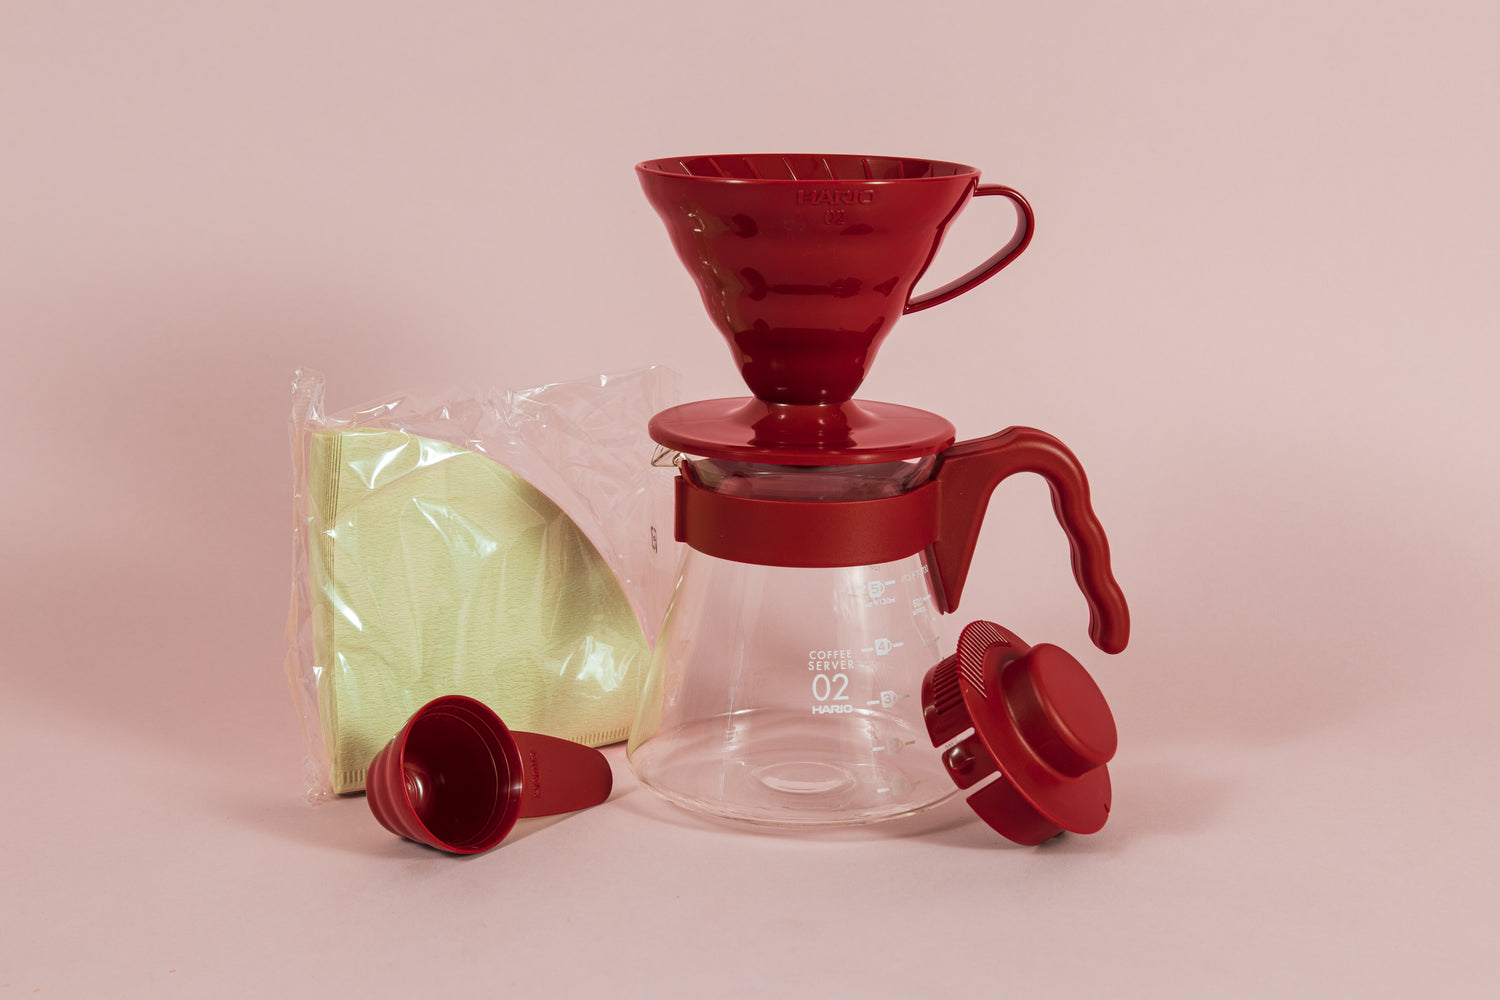 Red all plastic cone shaped dripper sitting on a glass server with red plastic handle next to a pack of brown filters and red plastic scoop and lid.